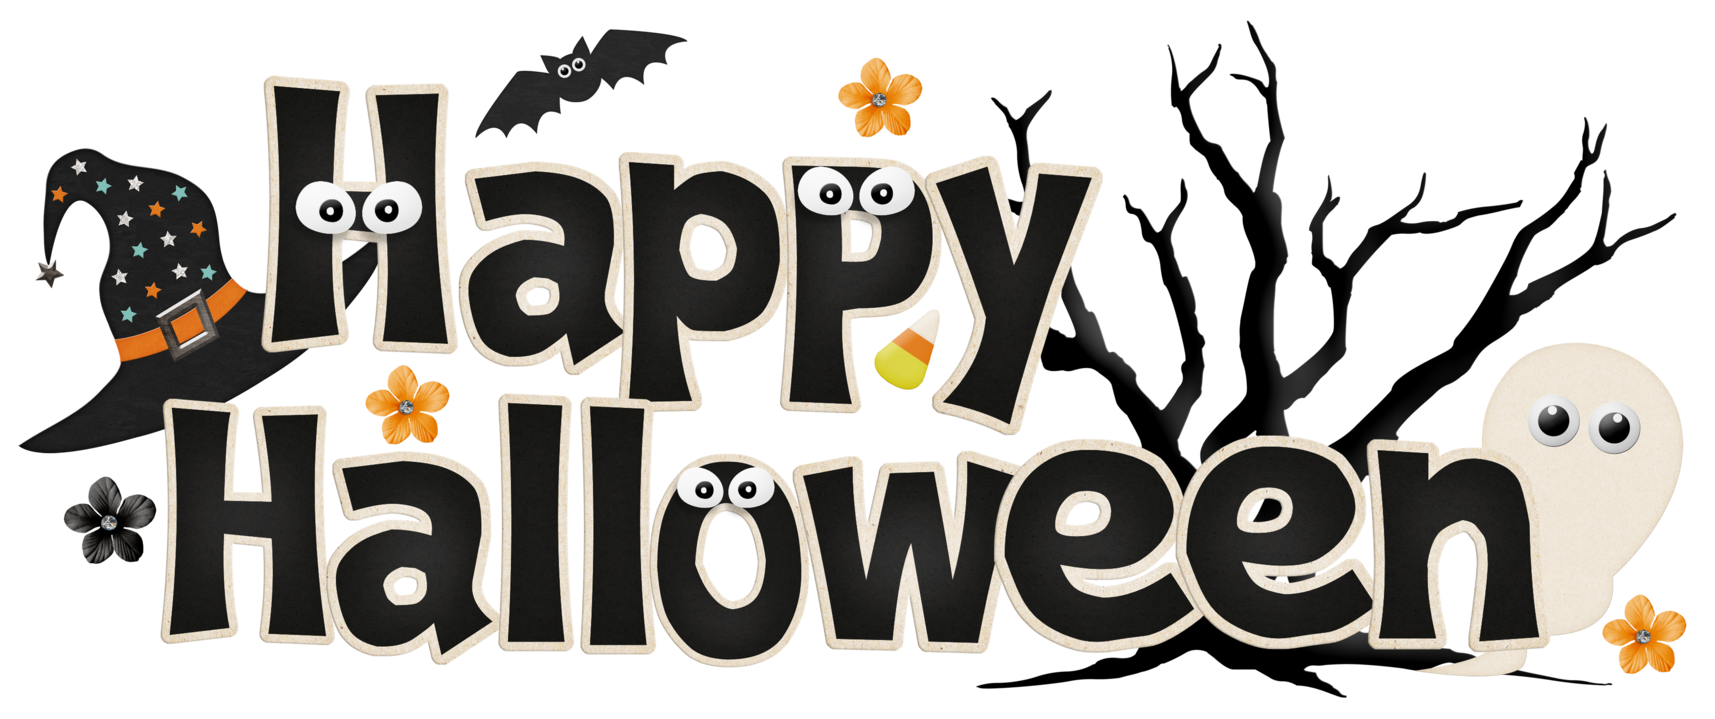 happy halloween png festival collections #27417